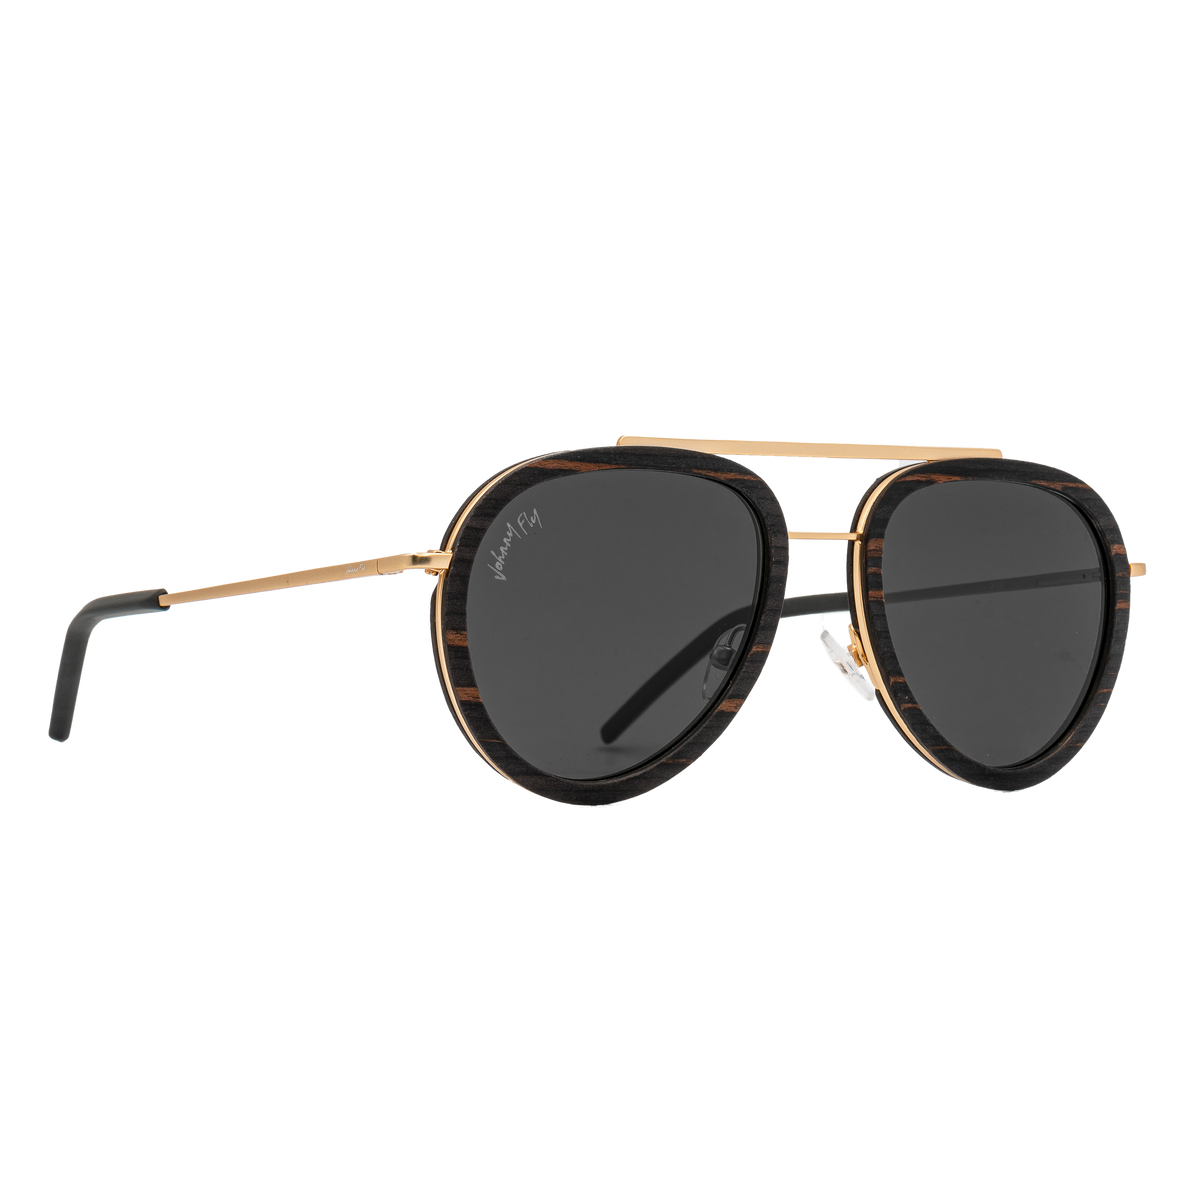 Kirk Sunglasses by Johnny Fly